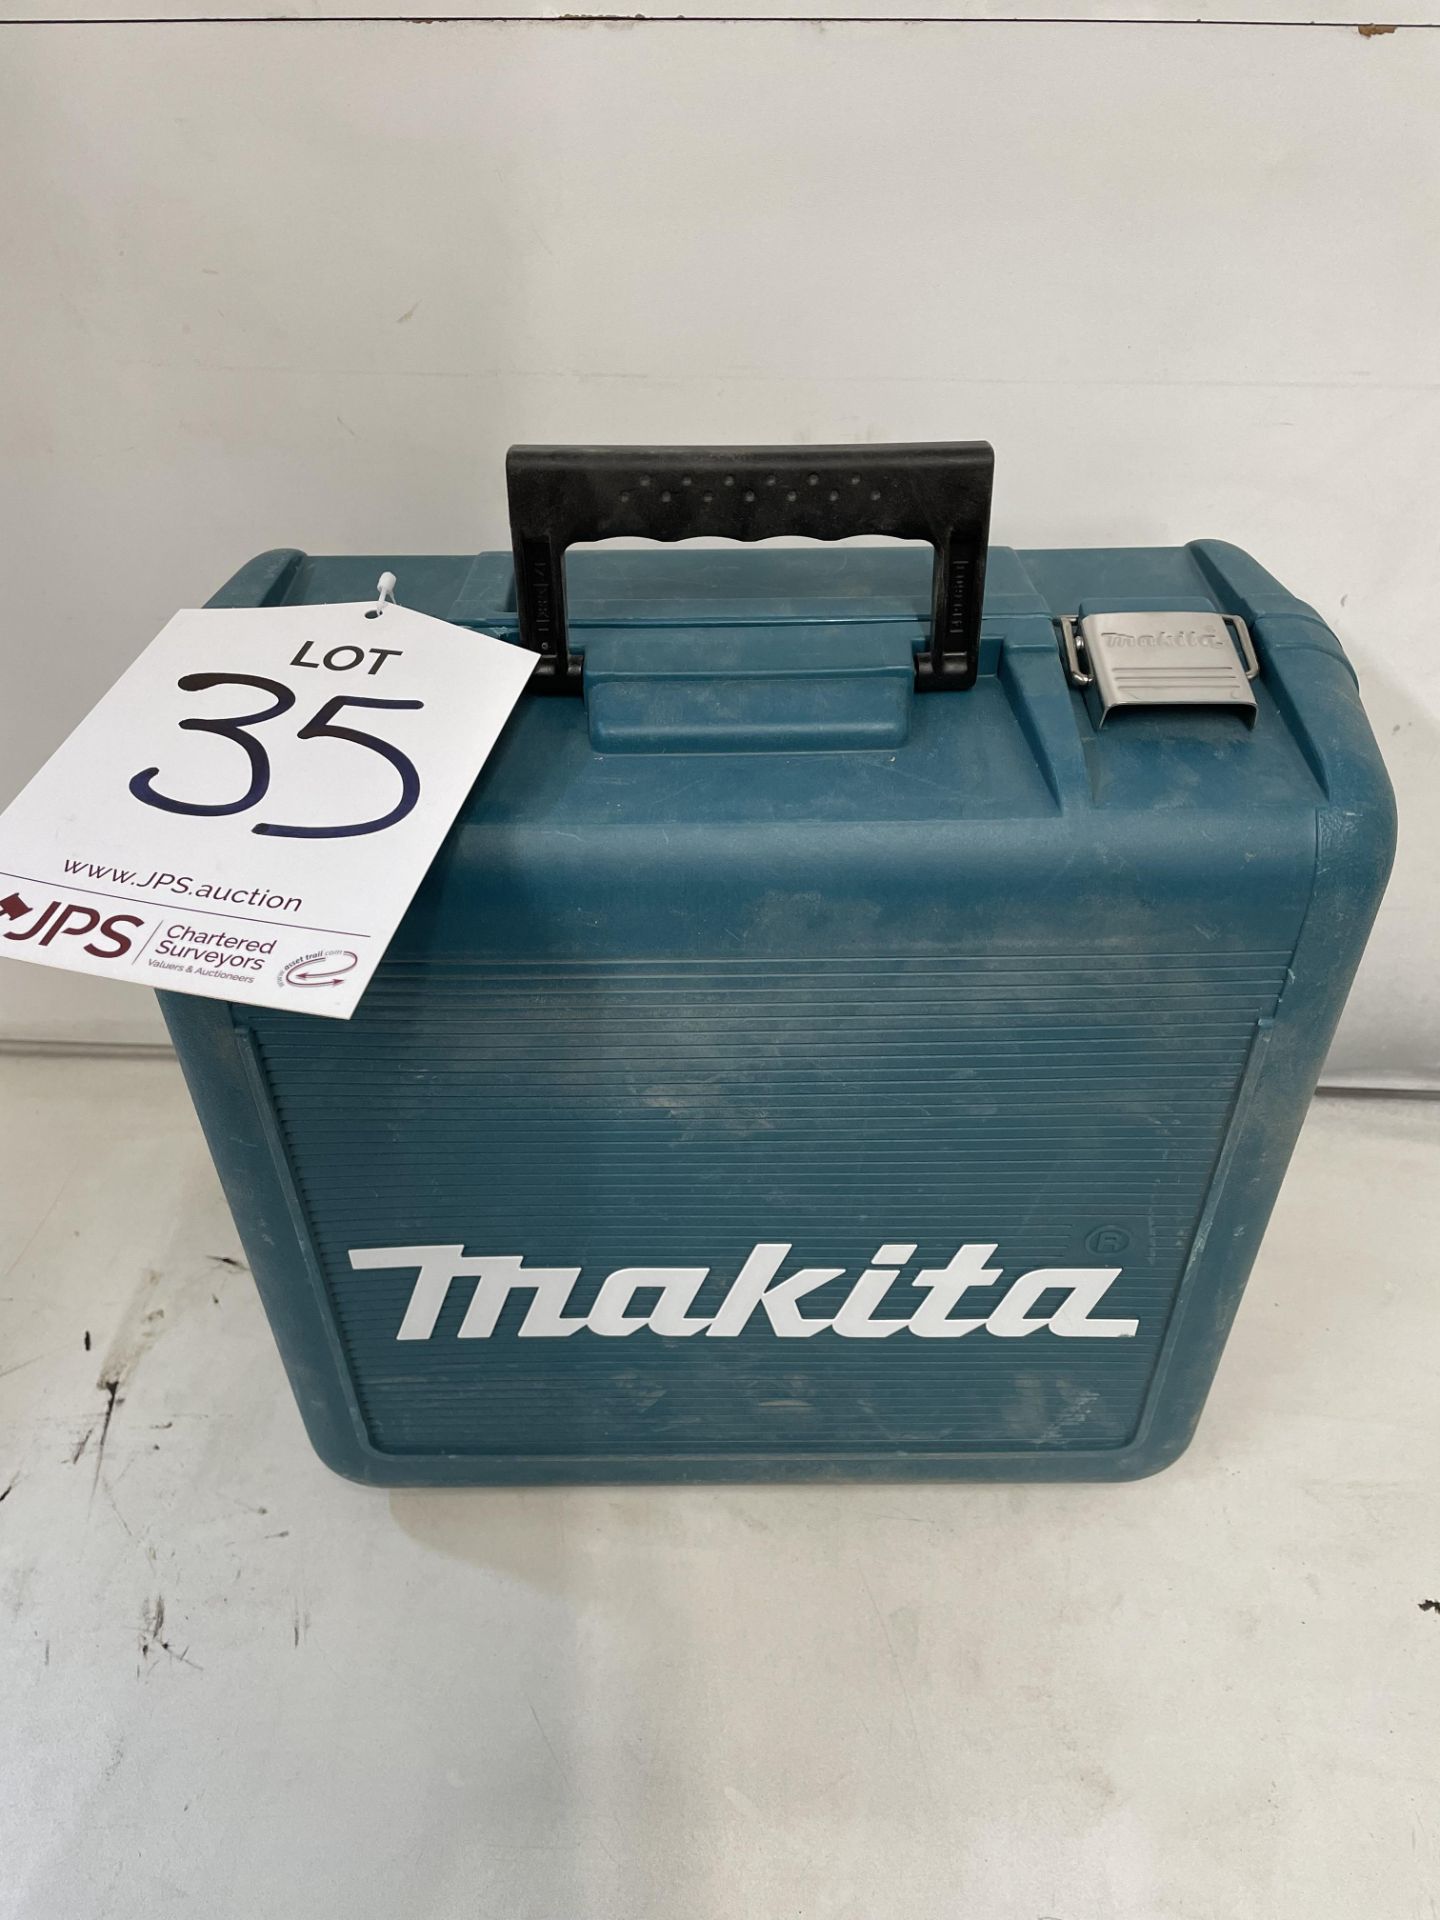 Makita RP0900 Electric Plunge Router 240V w/ Case - Image 6 of 6